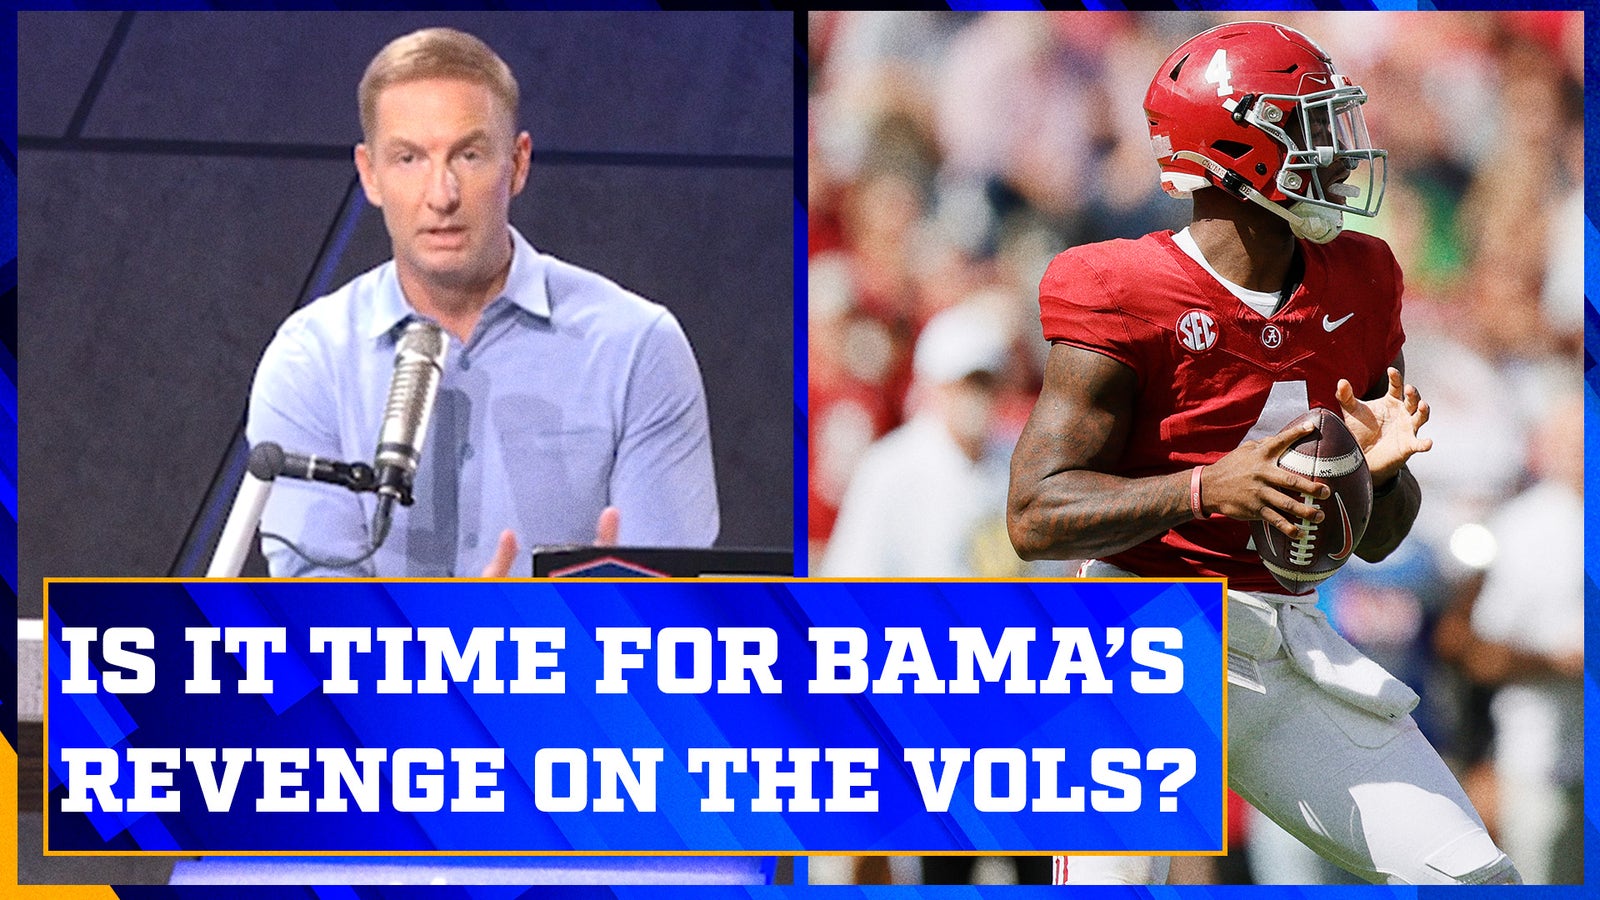 Will Alabama get revenge against Tennessee?